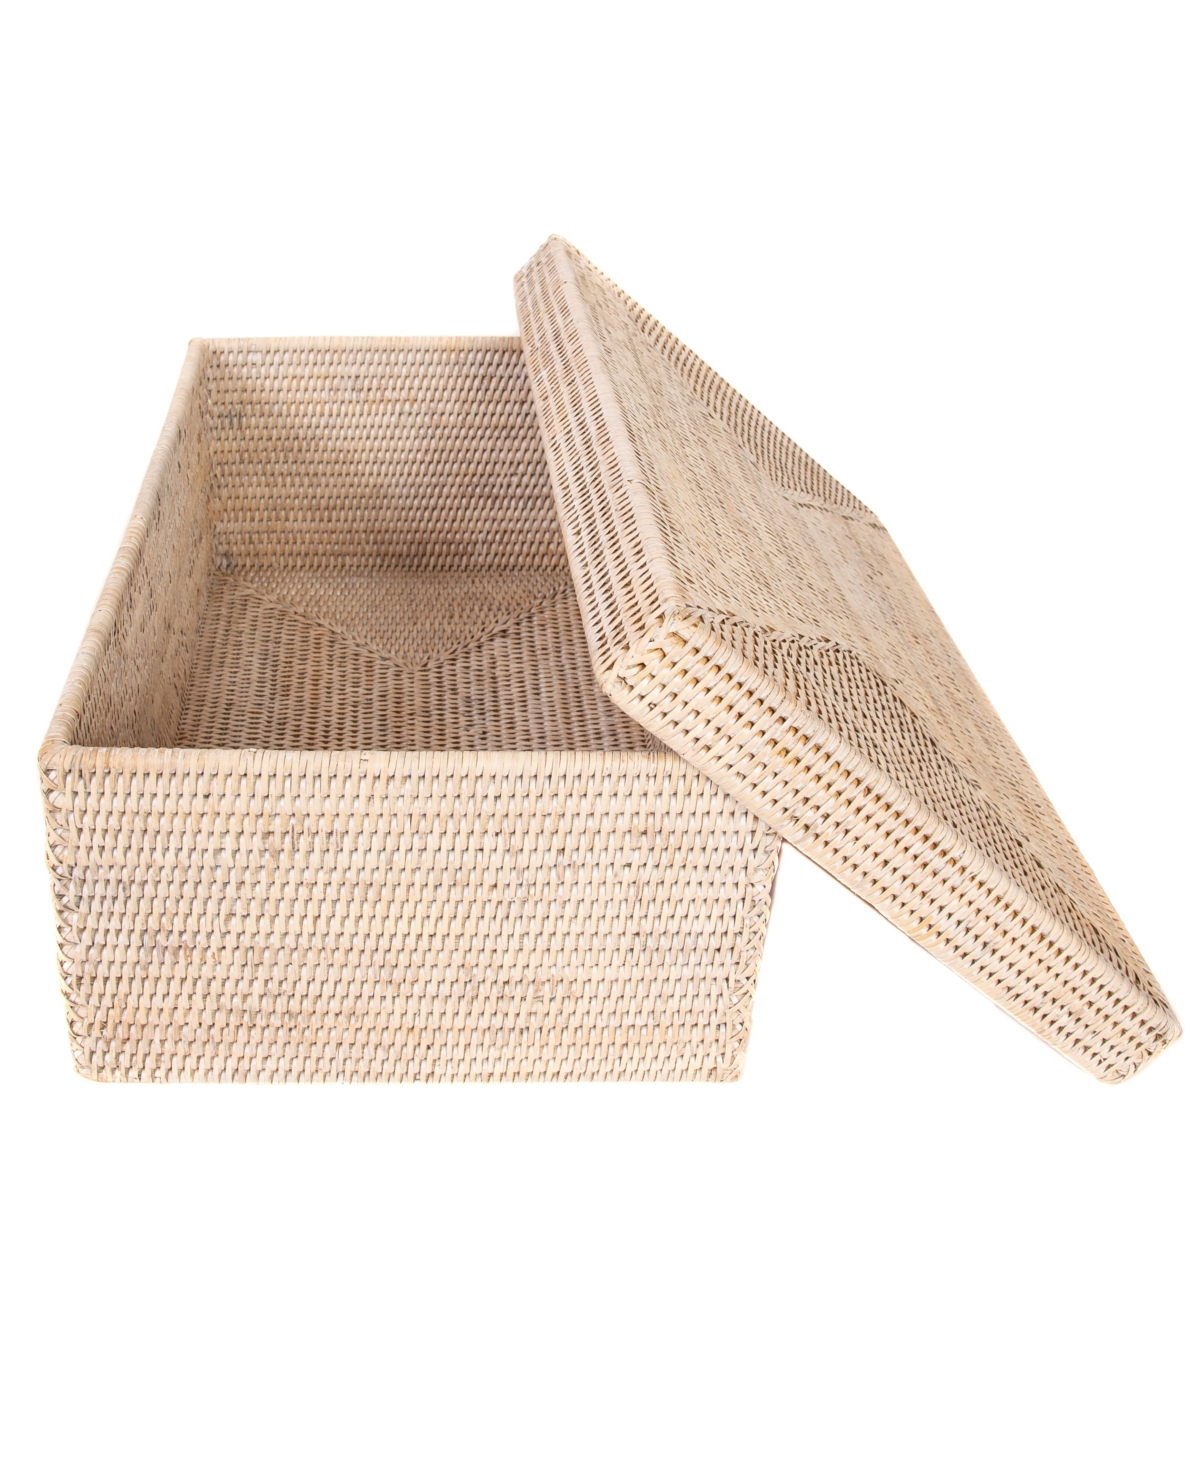 Shop Artifacts Trading Company Artifacts Rattan Rectangular Storage Box With Lid In Off-white